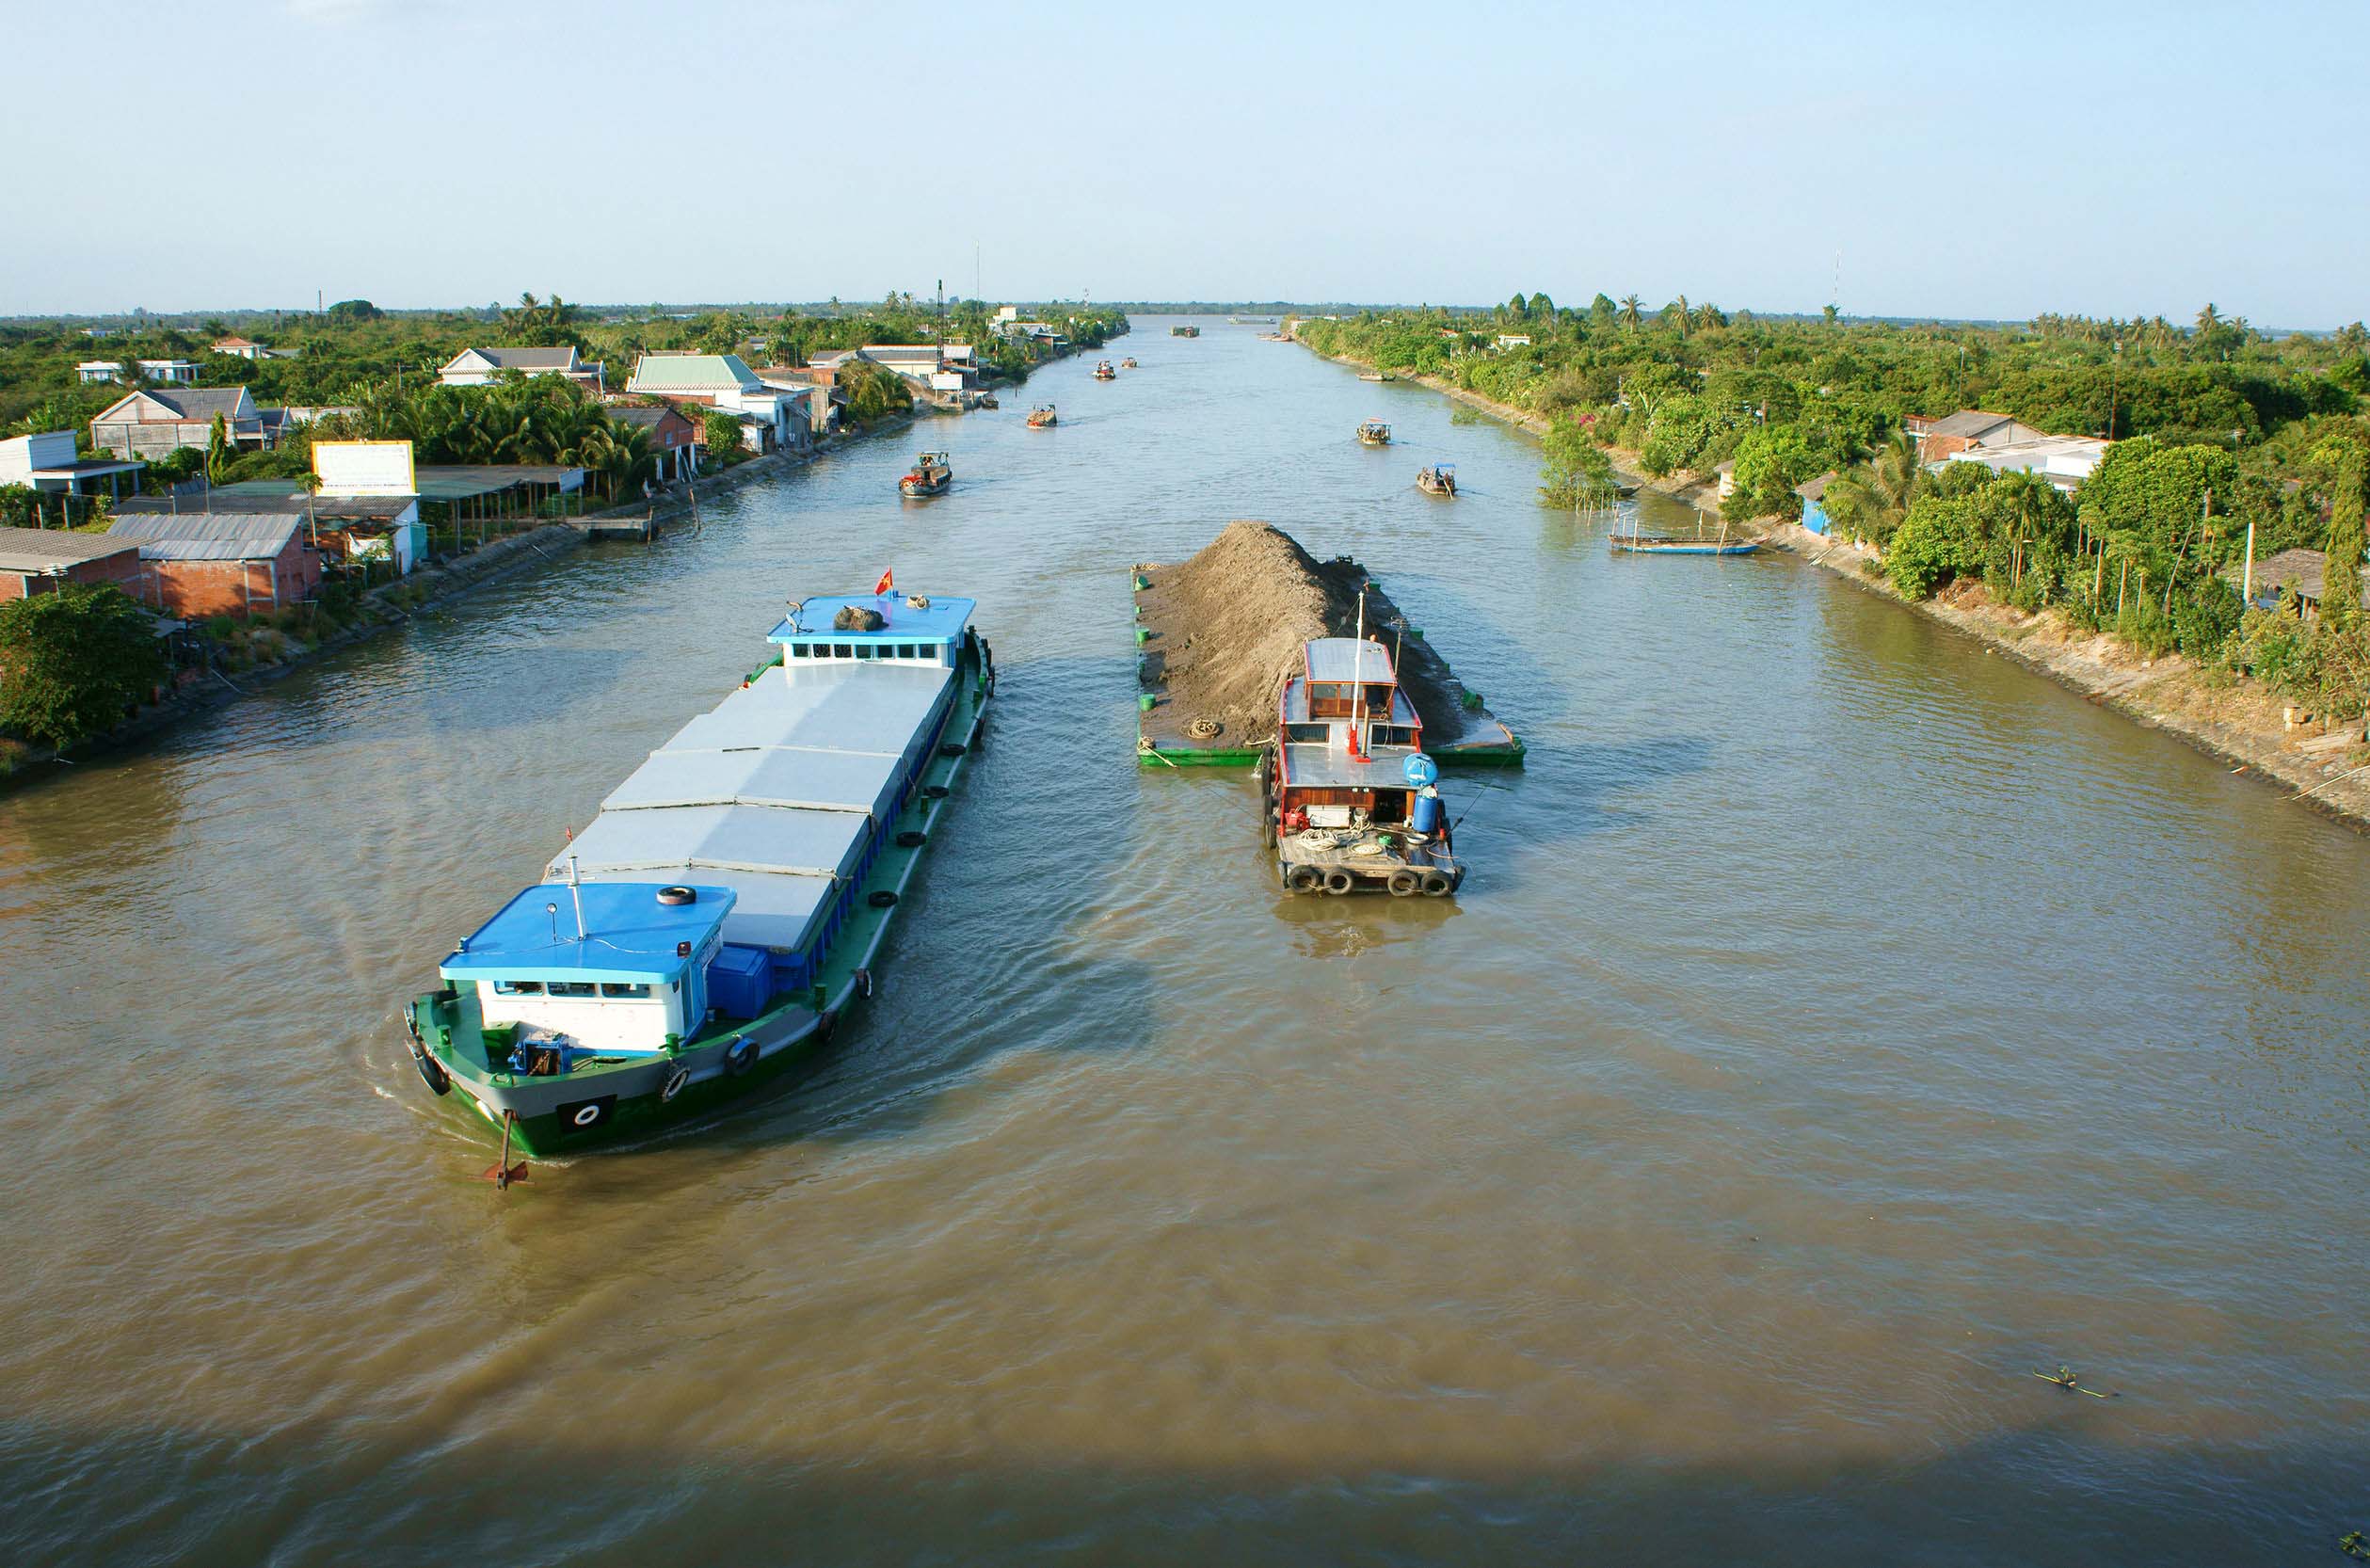 Waterways are an integral part of life and commerce in Southeast Asia.